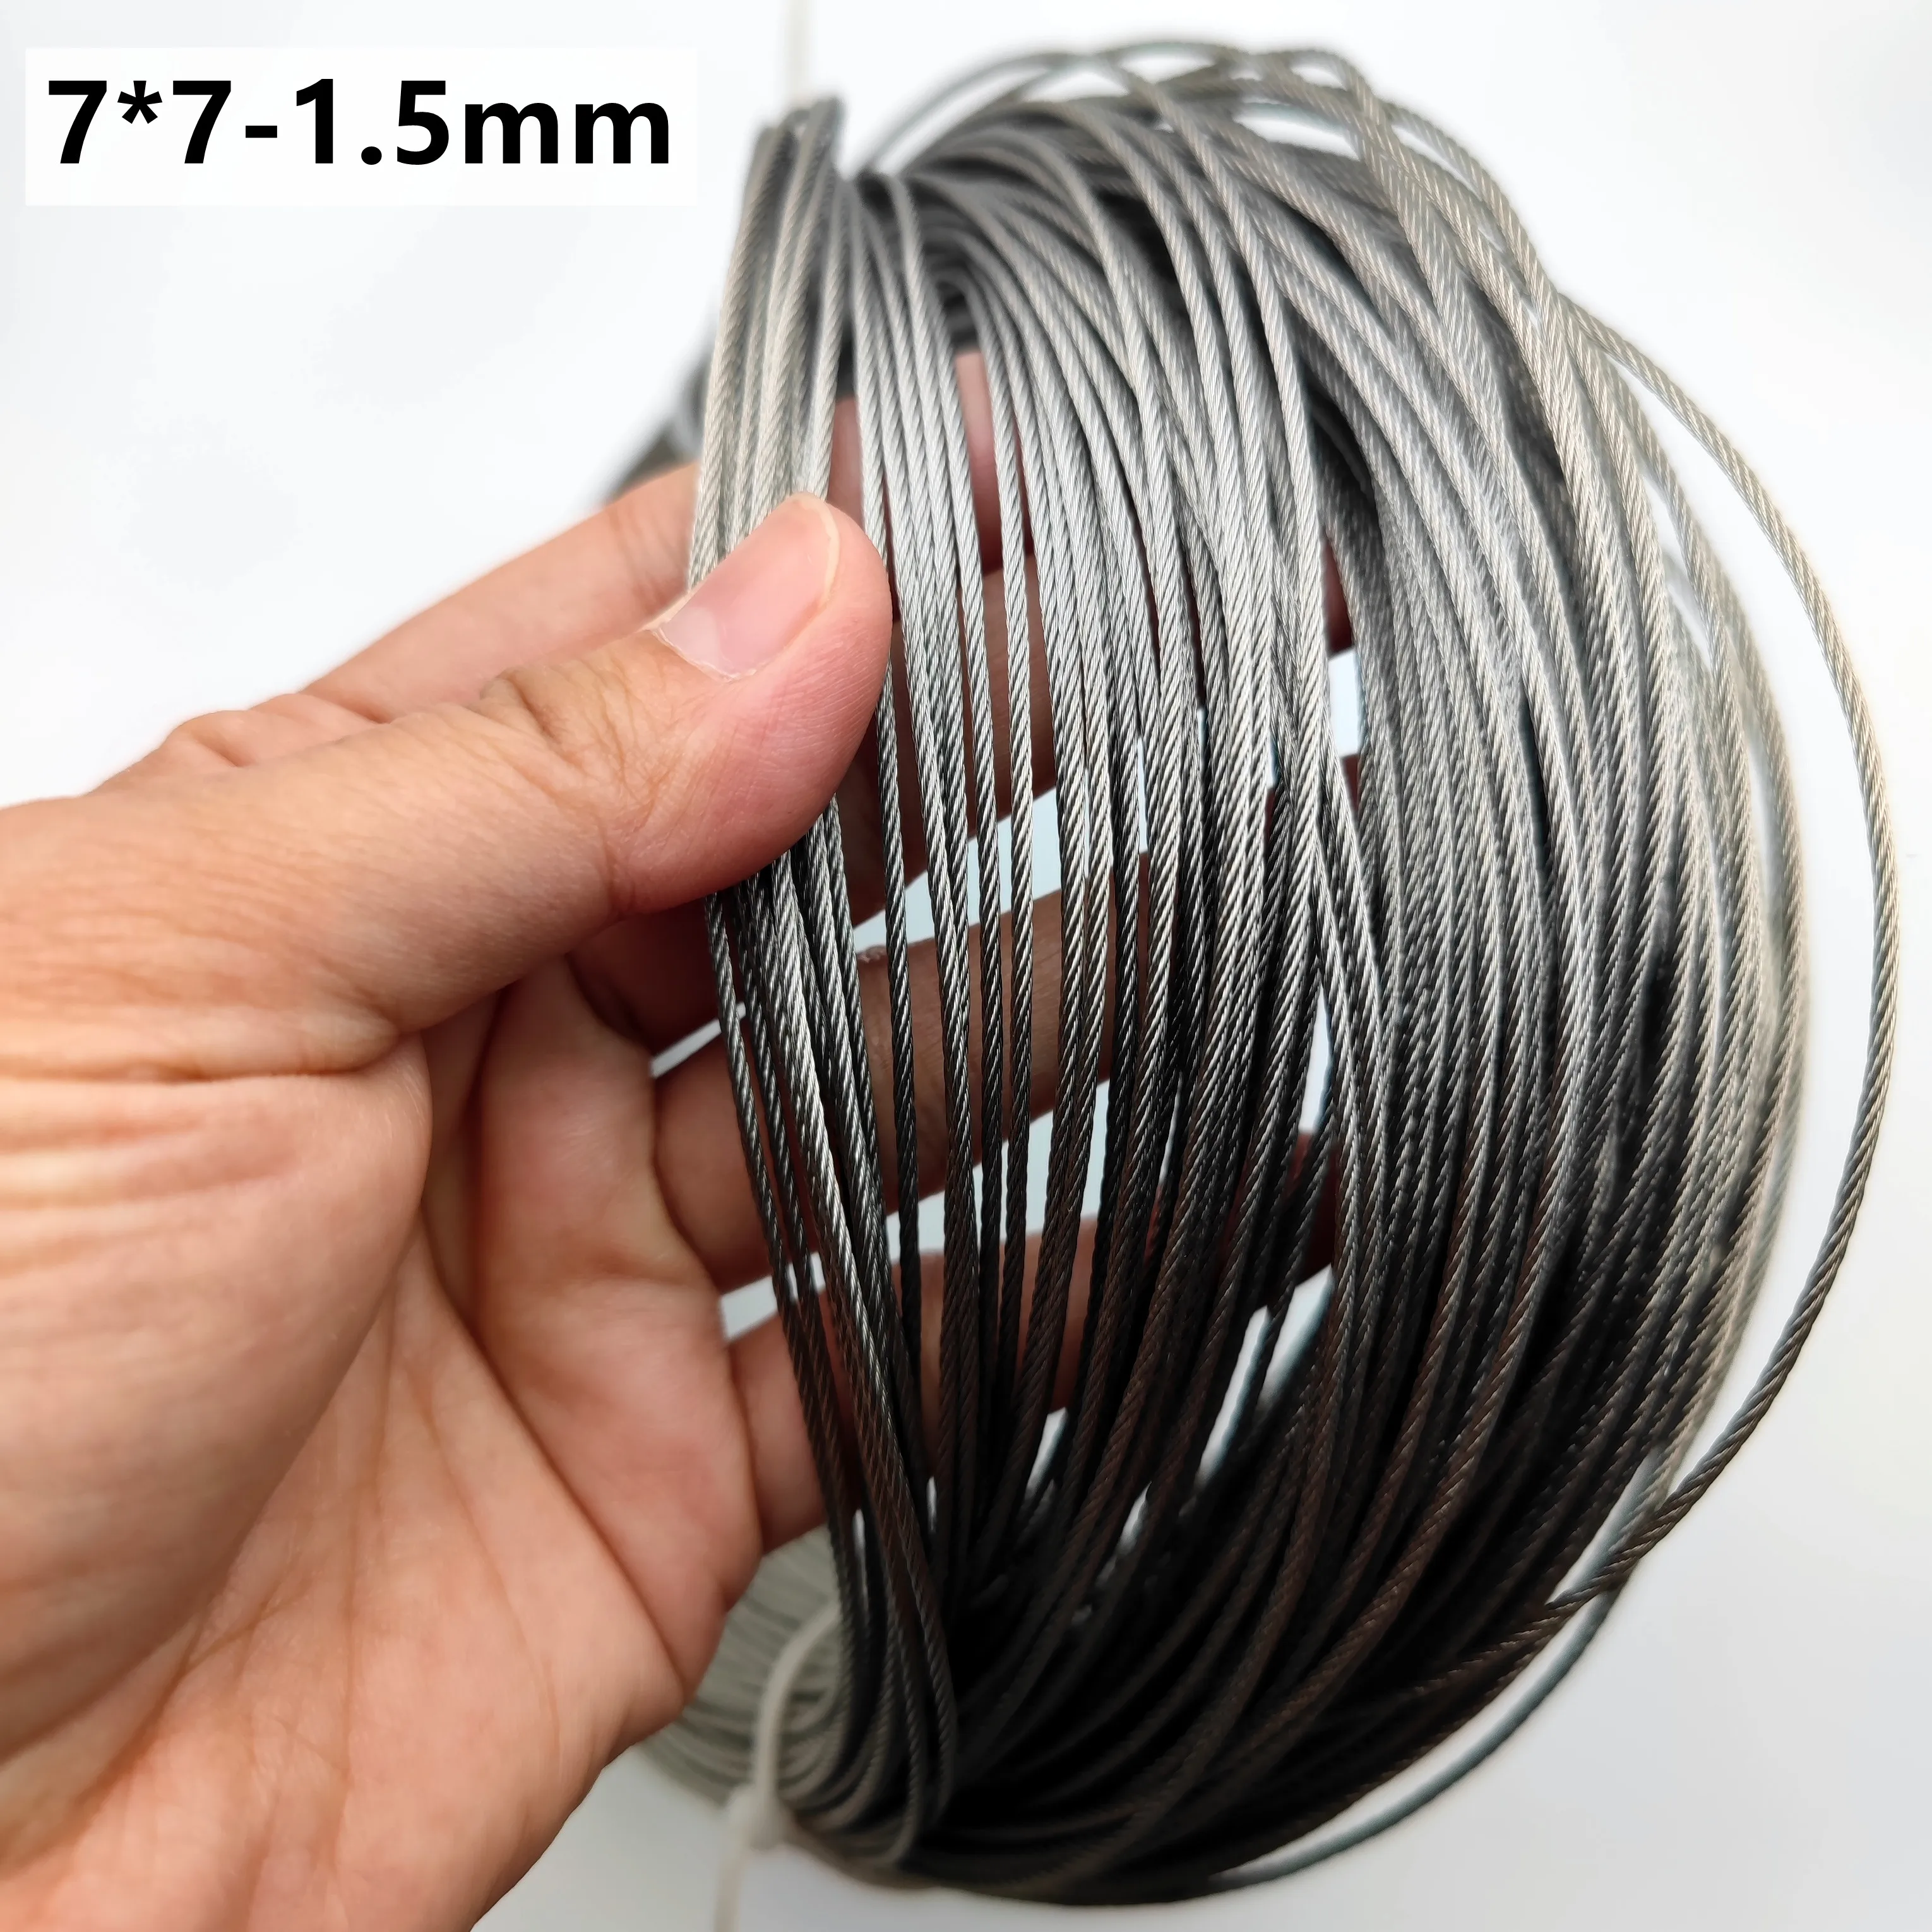 50M/100M/200M 1.5mm Diameter 7X7 Construction 304 Stainless steel Wire rope Alambre Softer Fishing Lifting Cable 10m 20m 30m 40m 3mm diameter 7x19 construction 304 stainless steel wire rope alambre softer fishing lifting cable